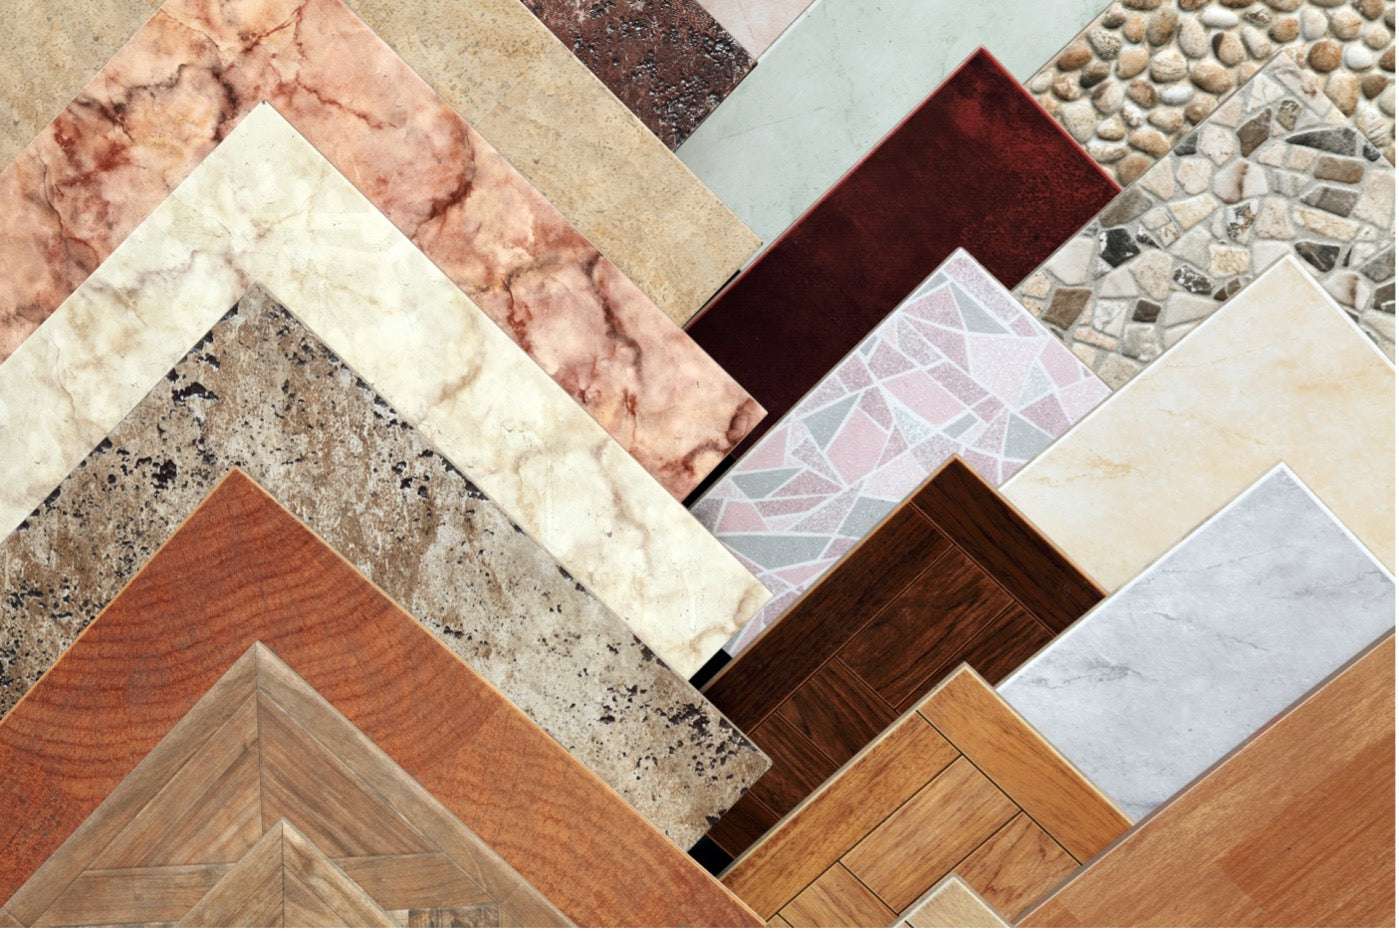 Shop Floor Tiles at Great Prices